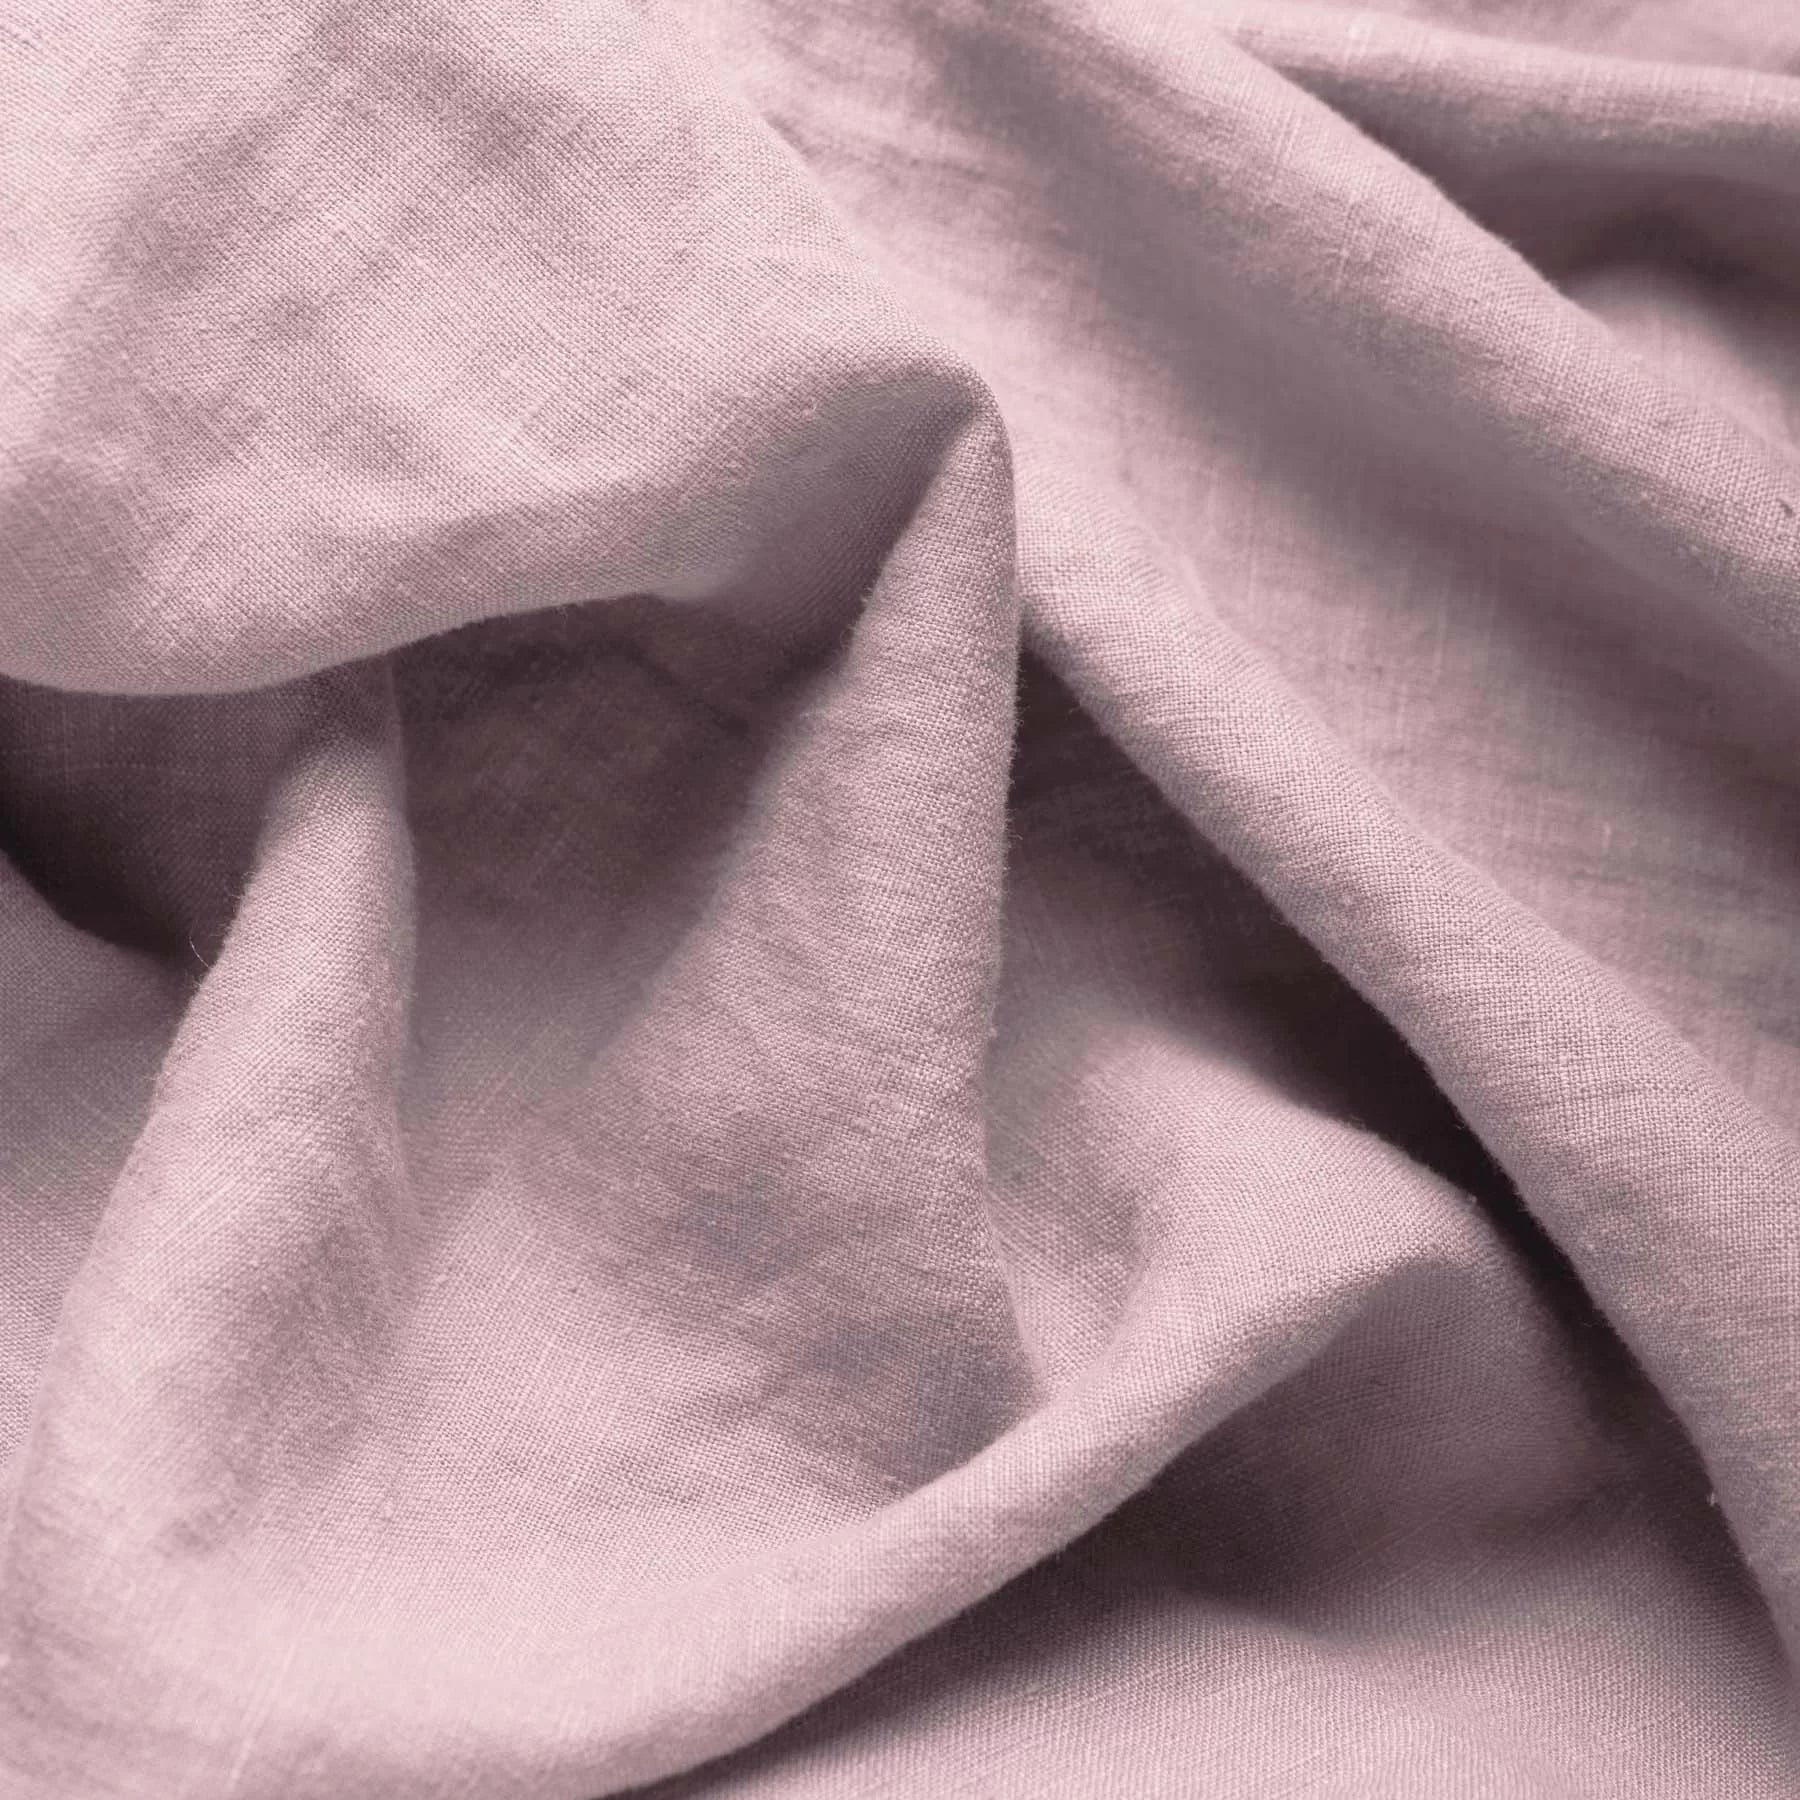 Stone Washed Linen - Old Pink